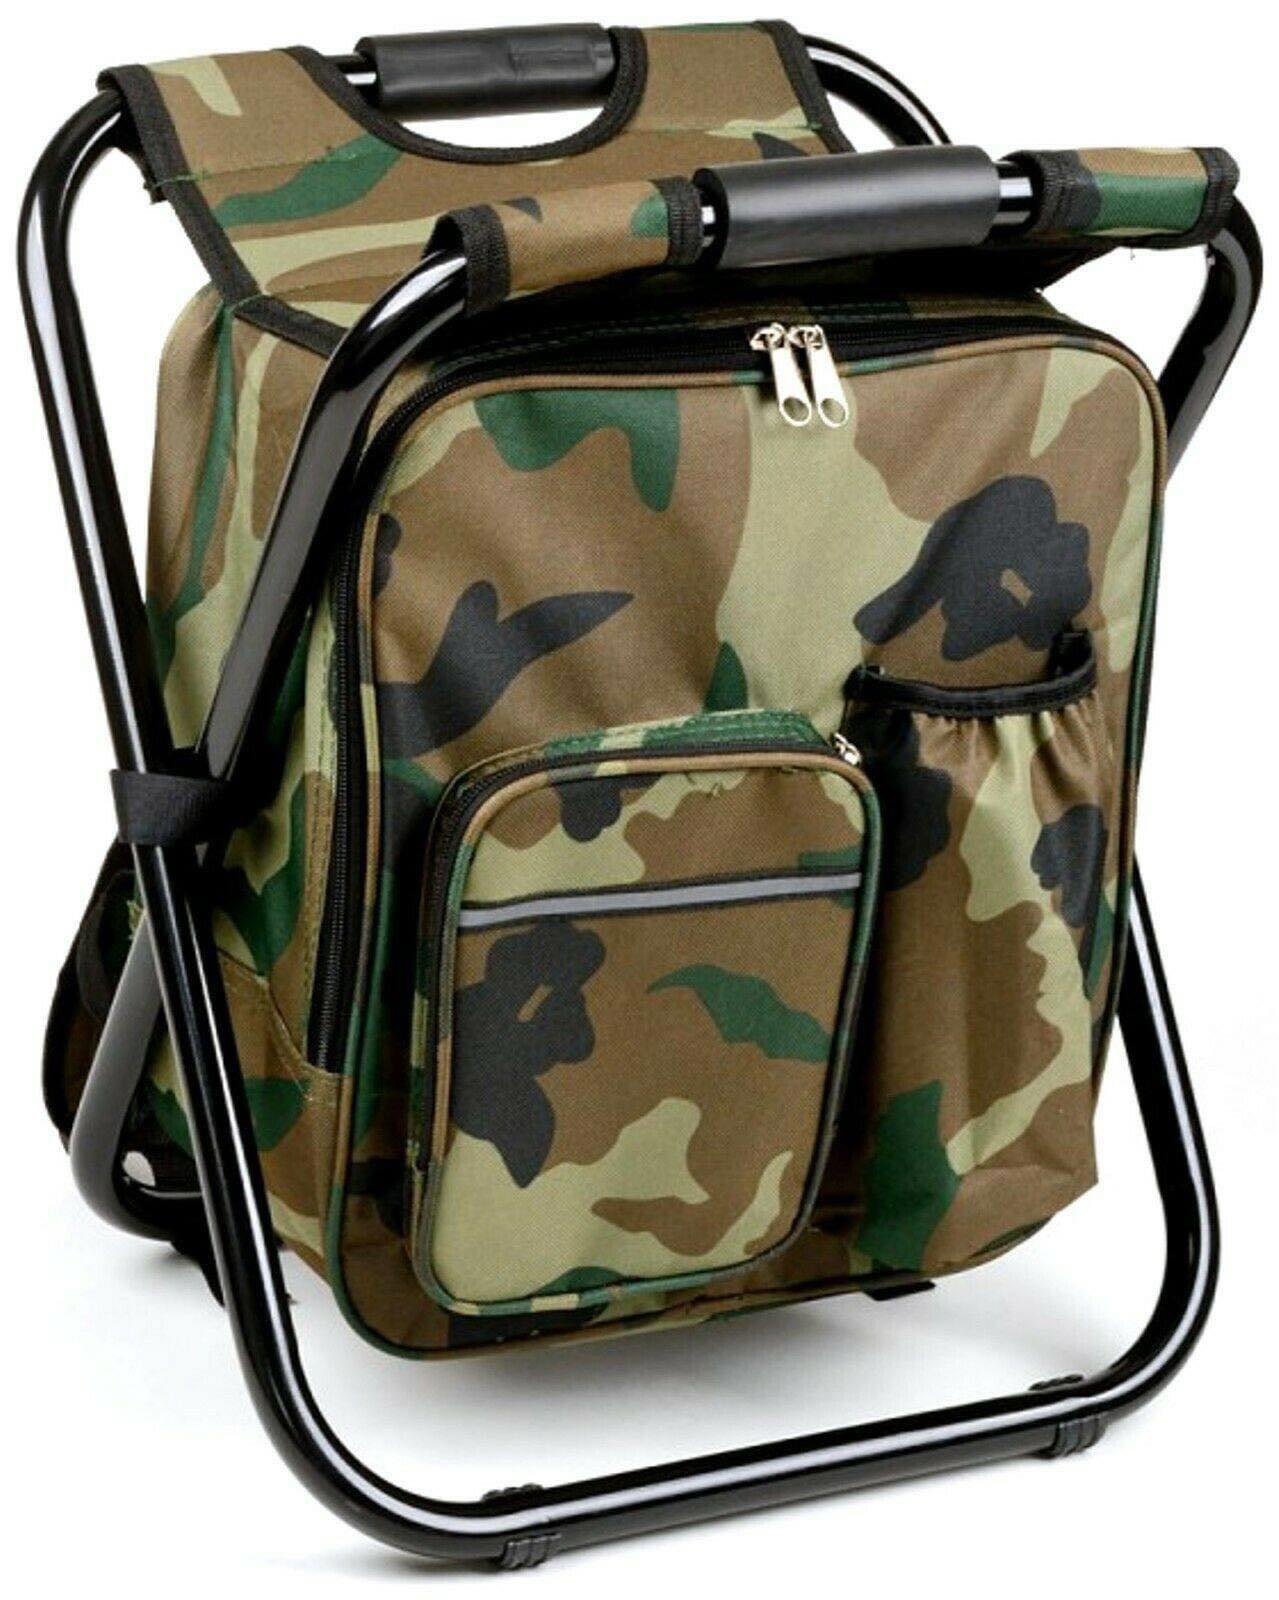 CHAIR CAMO WITH COOLER BAG